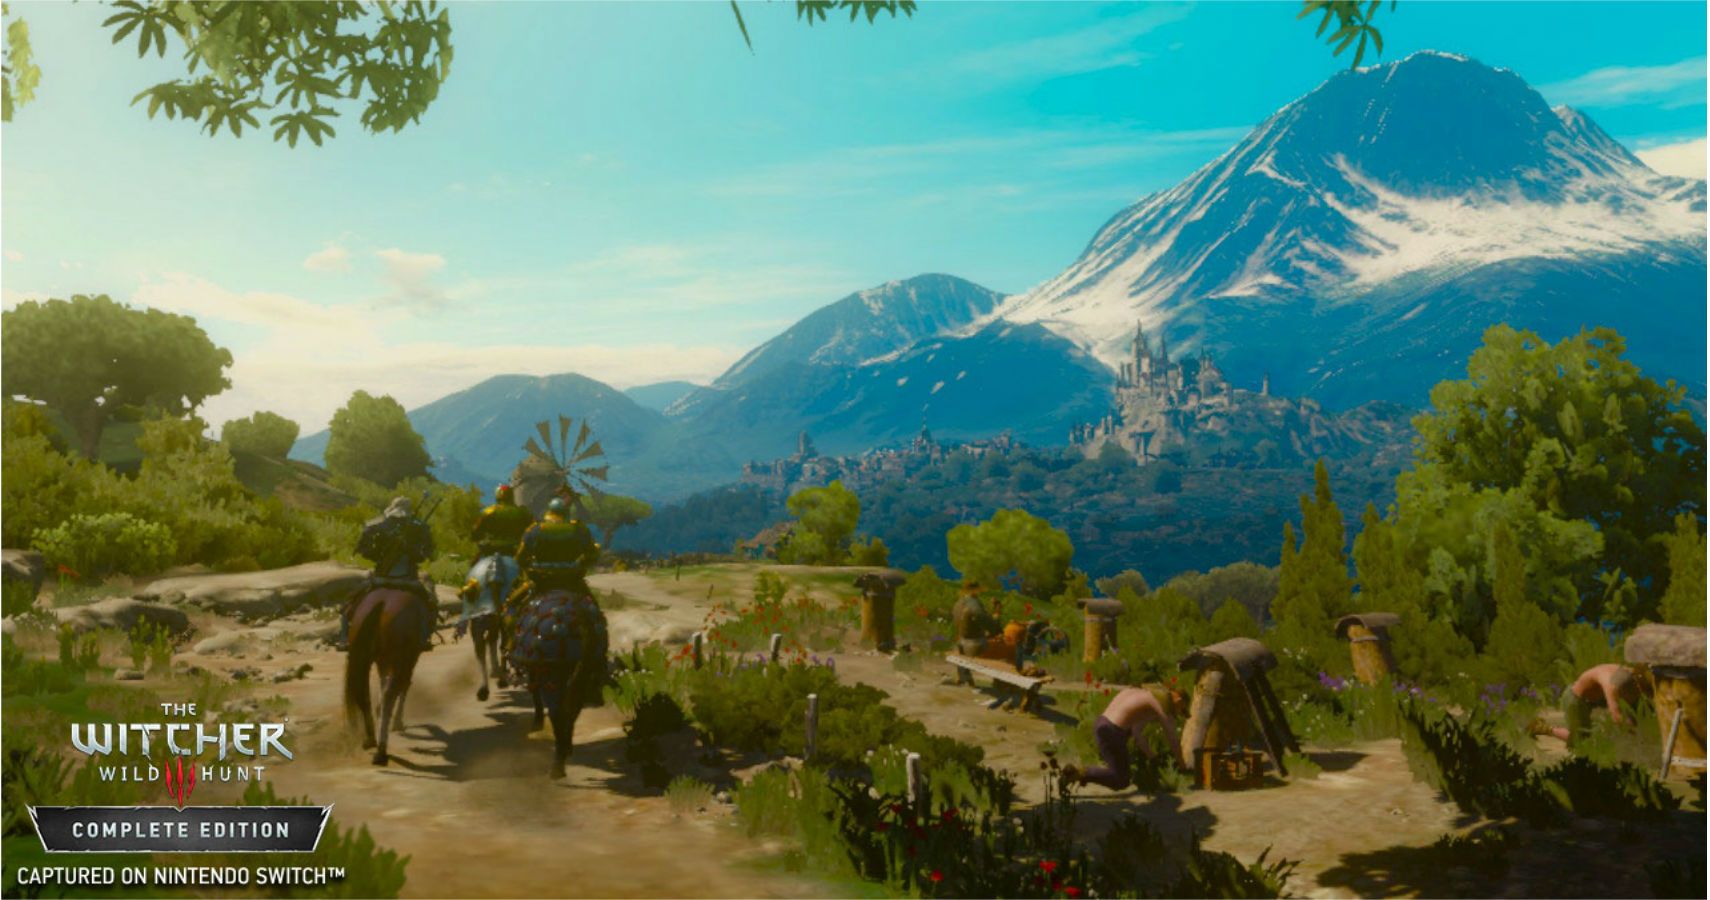 New Screenshots From The Witcher 3 On Switch Are Surprisingly Beautiful